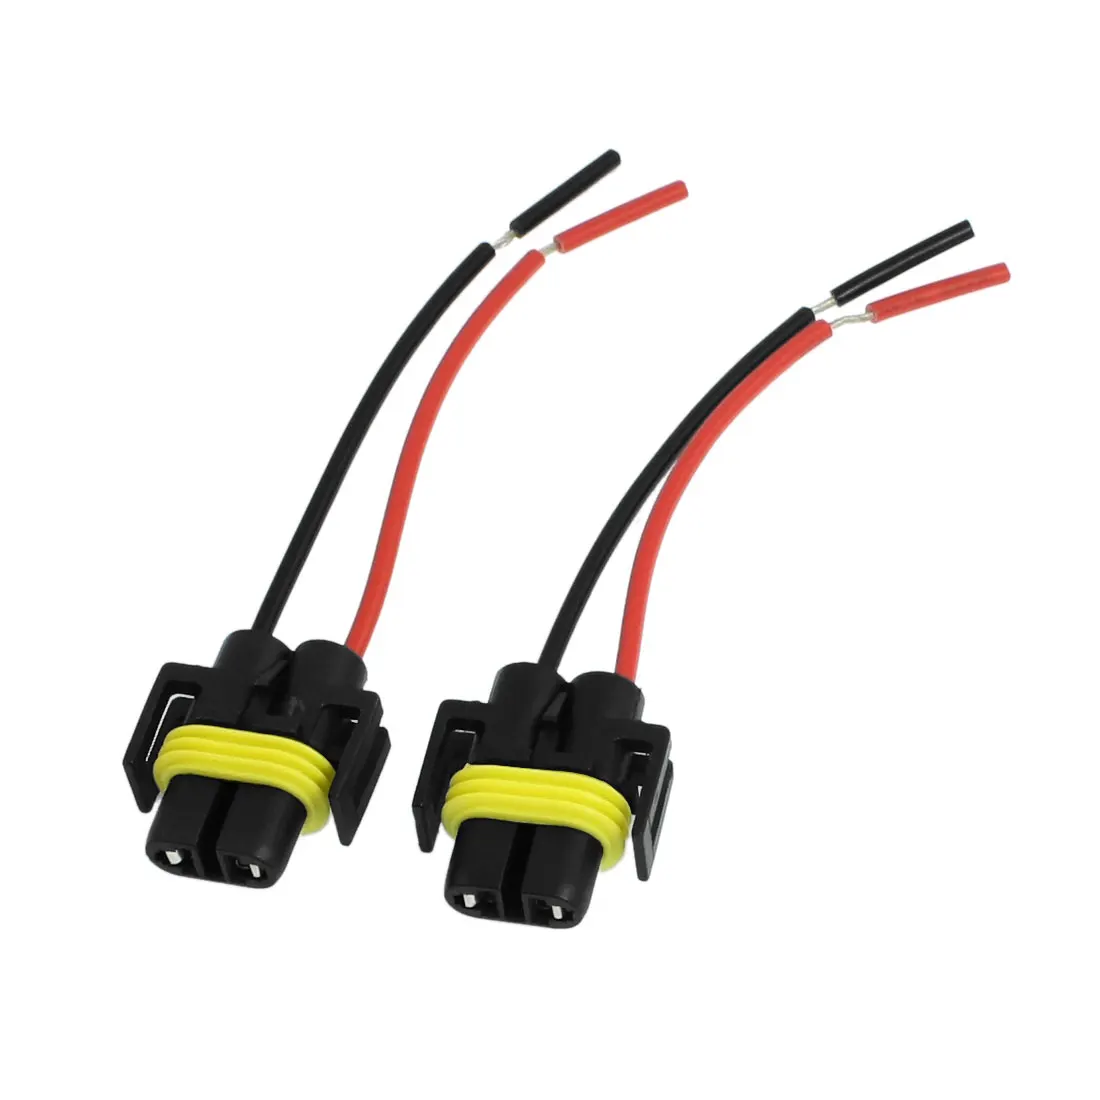 Uxcell 2 Pcs DC 12V Auto Car Headlight H11 Socket Harness Plastic Connector H11 / 880 / 881 Headlight Connector Replacement